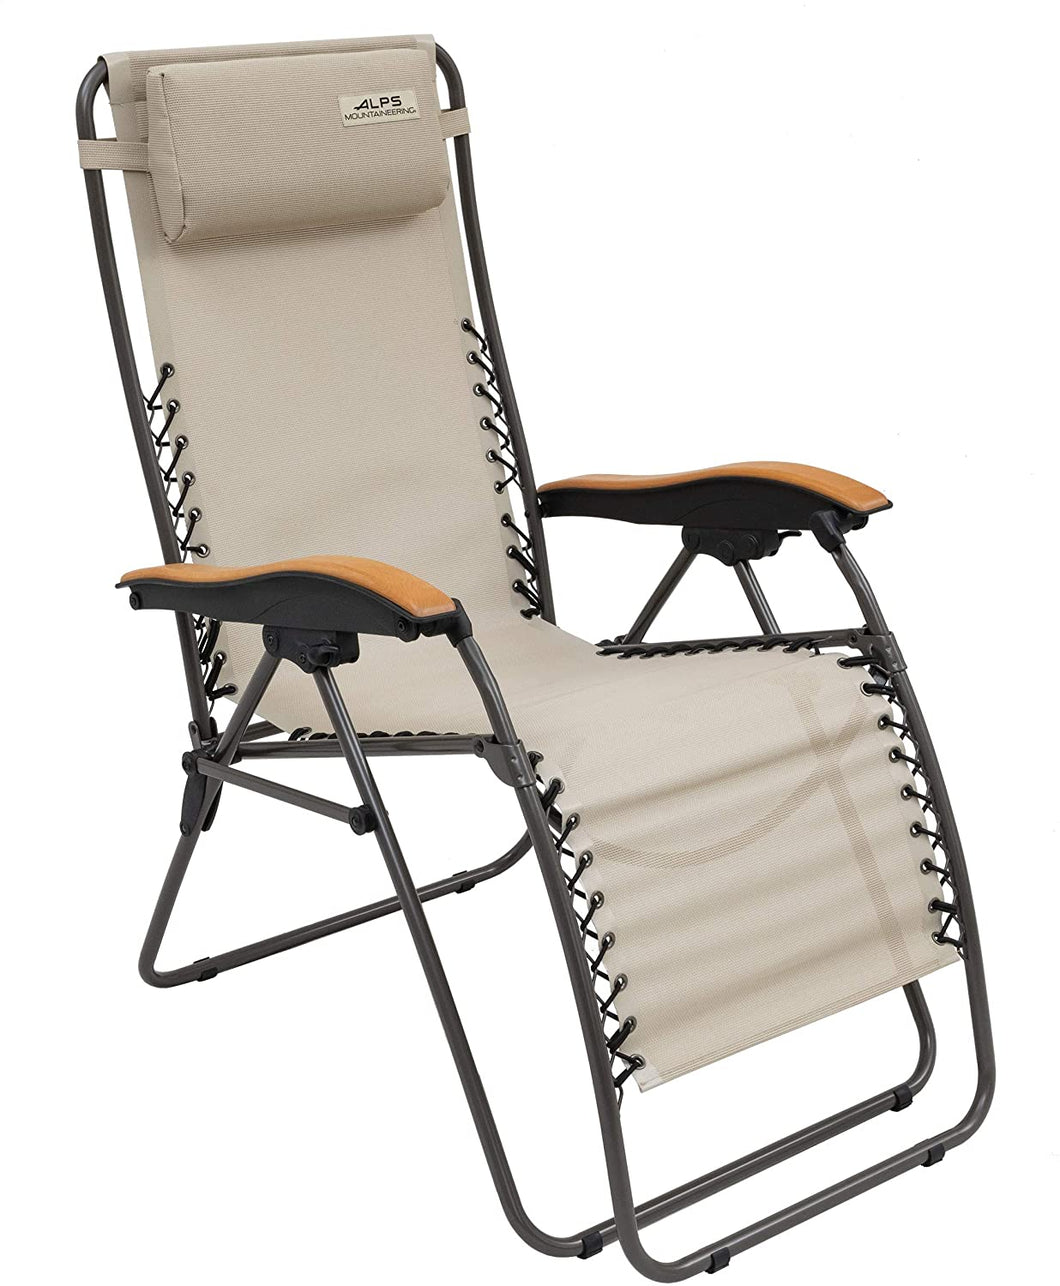 ALPS Mountaineering Lay-Z Lounger Chair - AL8121115